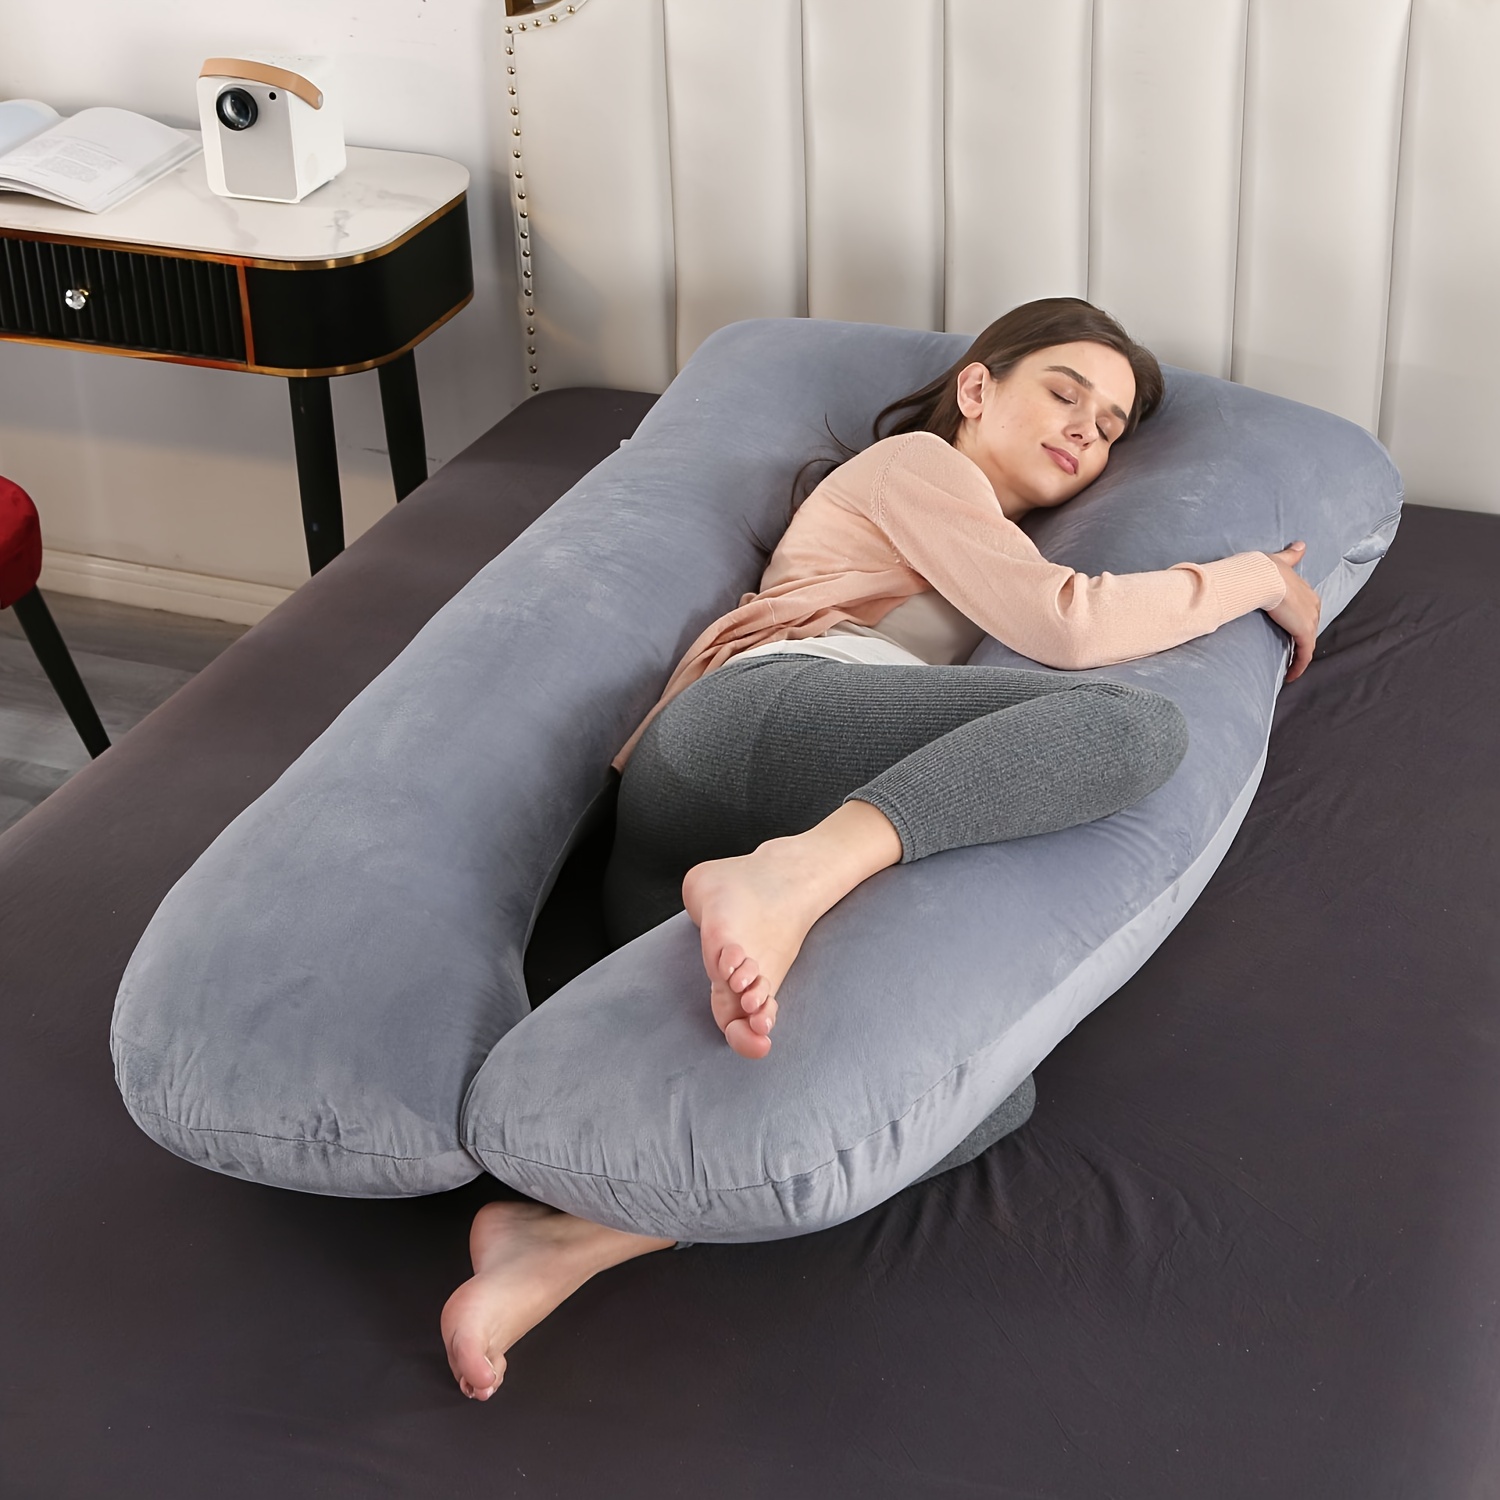  Black Velvet Large J-Shaped Home Pregnancy Pillows for Sleeping, Pillow Pregnant Woman Stomach Lift Pillow Side Sleeping Pillow Waist Pillow(31x47x70)  : Baby